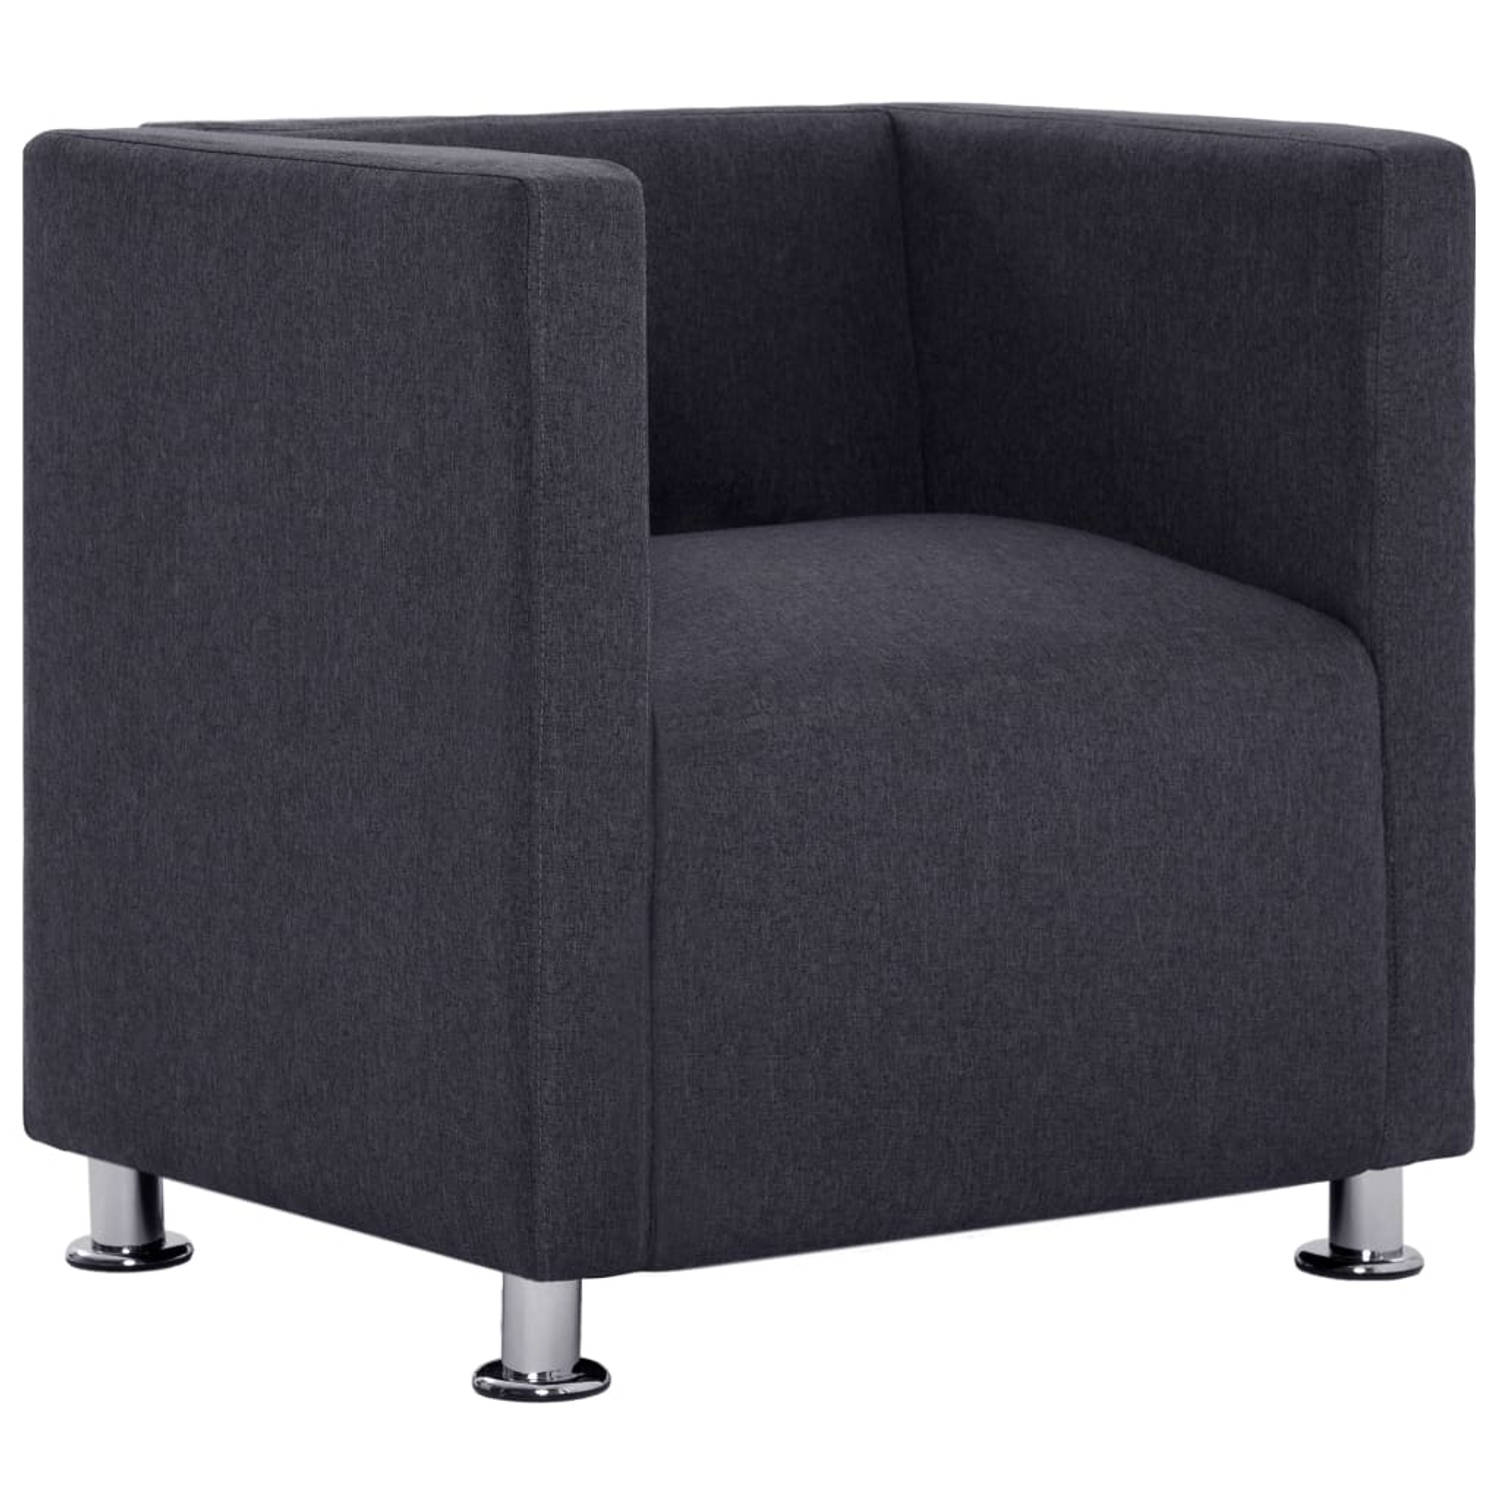 The Living Store Fauteuil kubus stof donkergrijs - Fauteuil